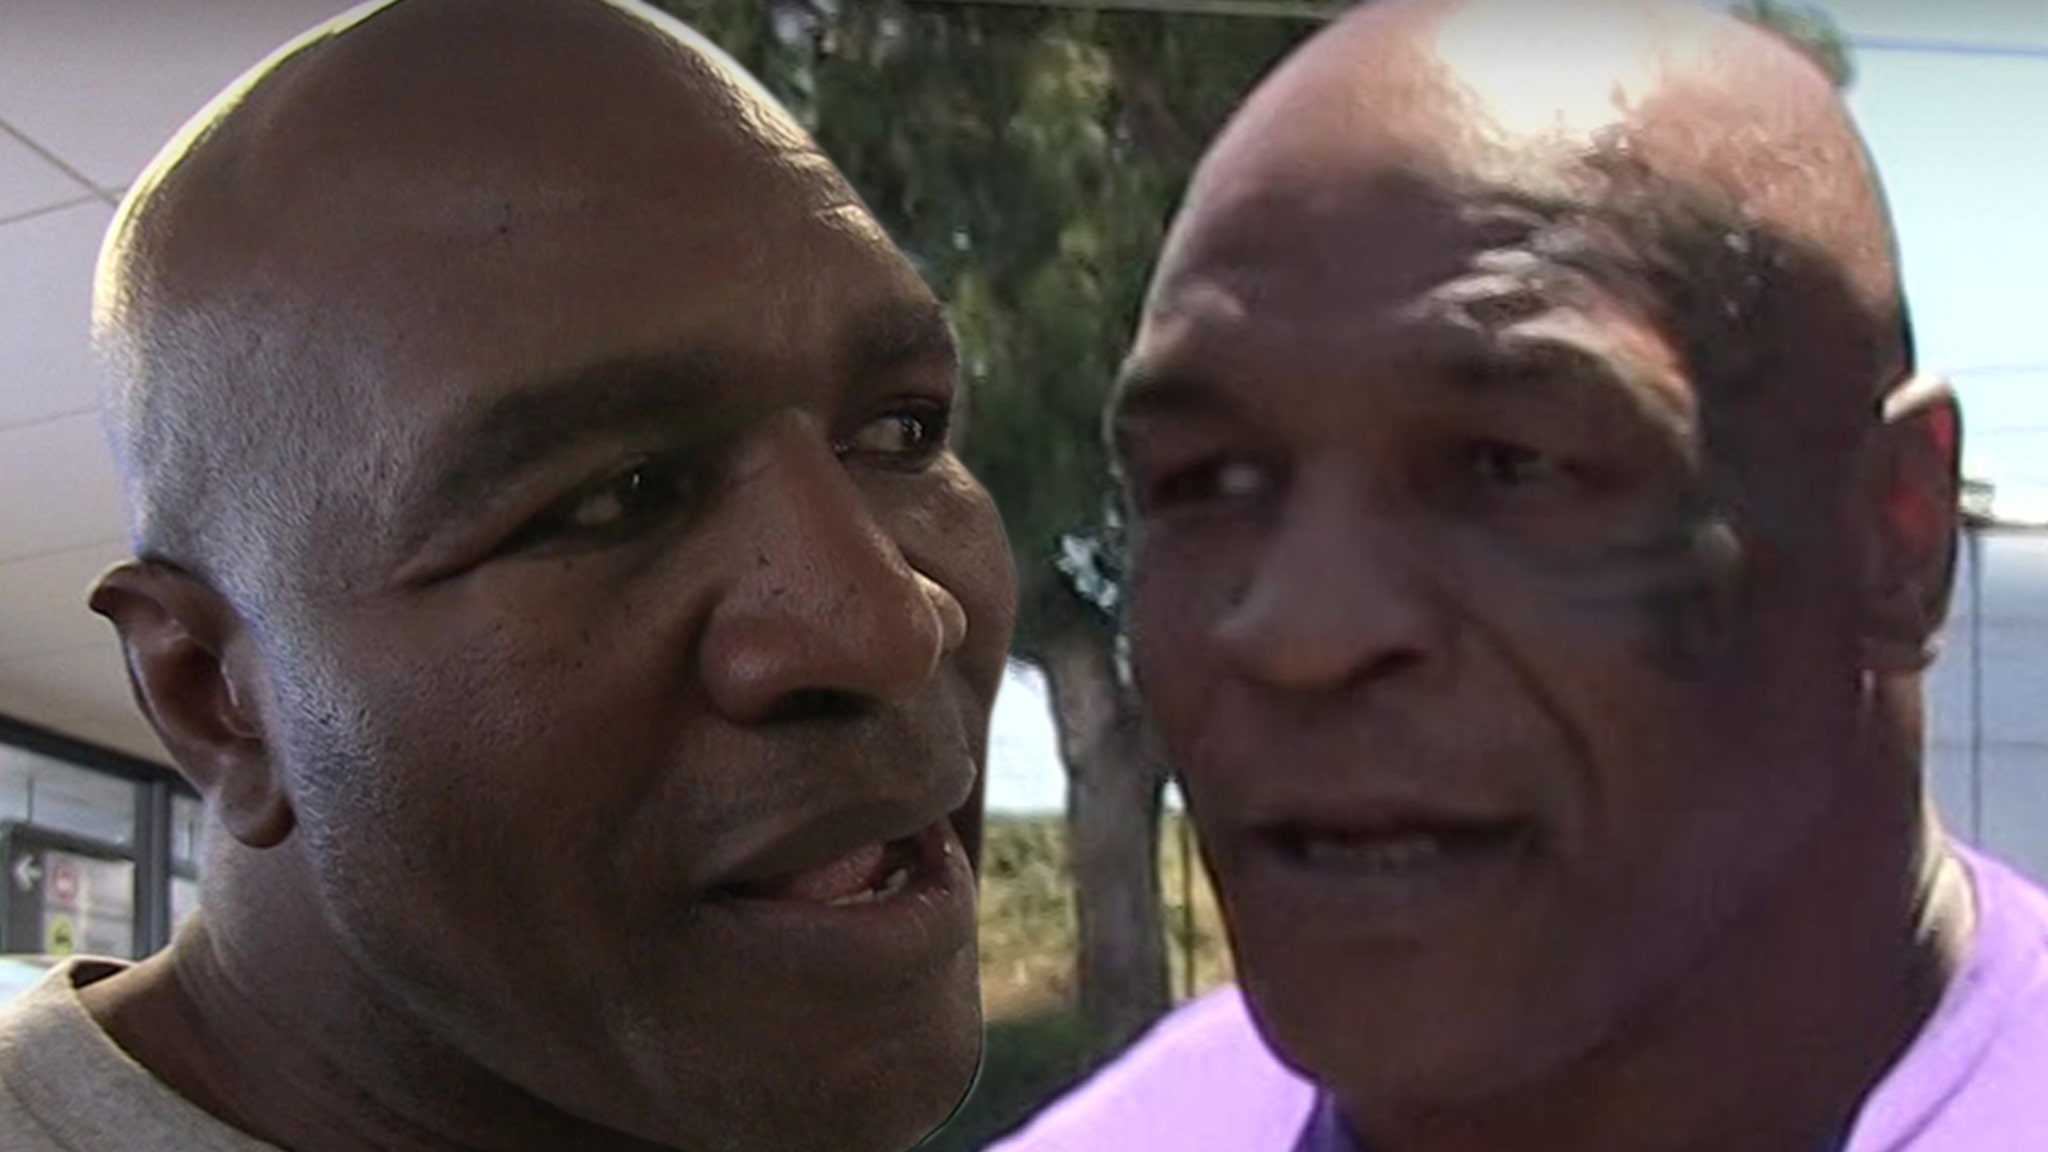 Evander Holyfield’s camp claims that Mike Tyson’s fight is not happening, ‘Deal Fell Apart’